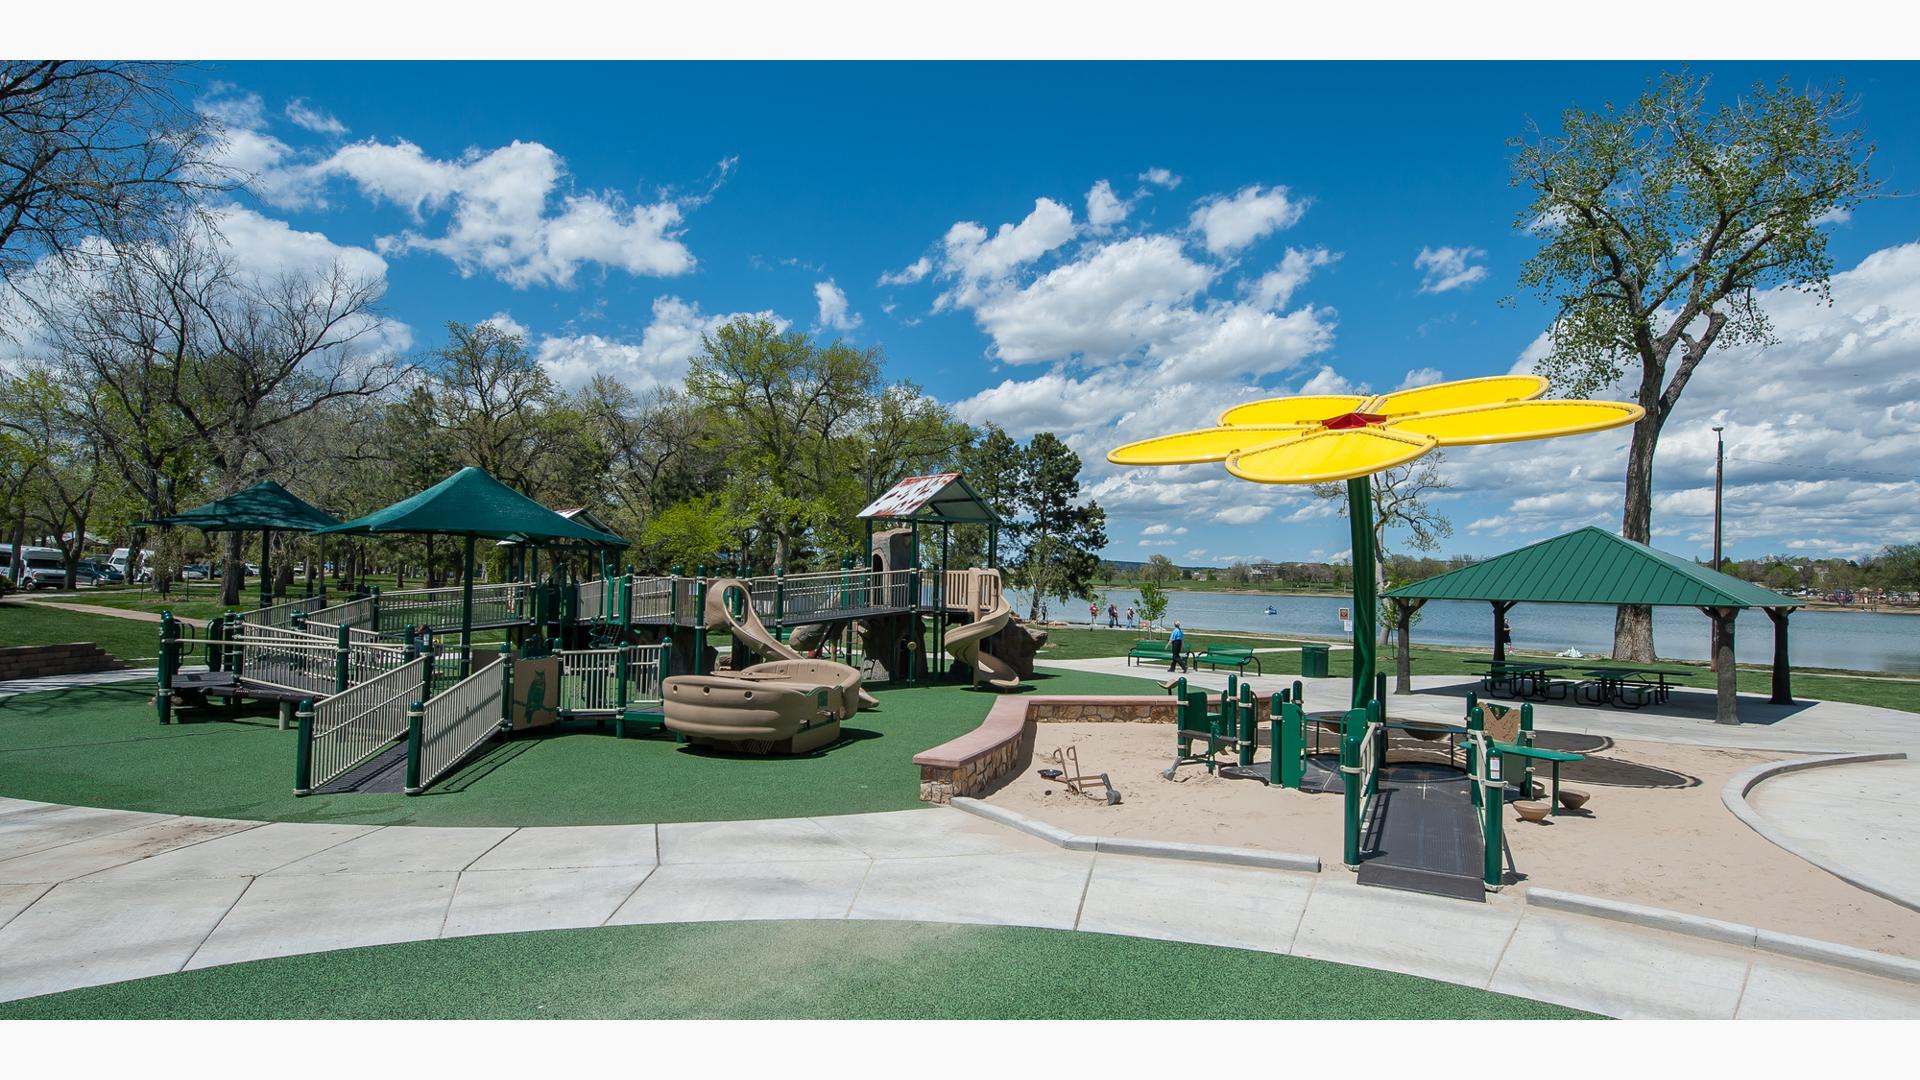 Playground structure with accessible ramps in tan and brown.  Play space also includes a yellow flower shaped shade structure with a lake in the background. 